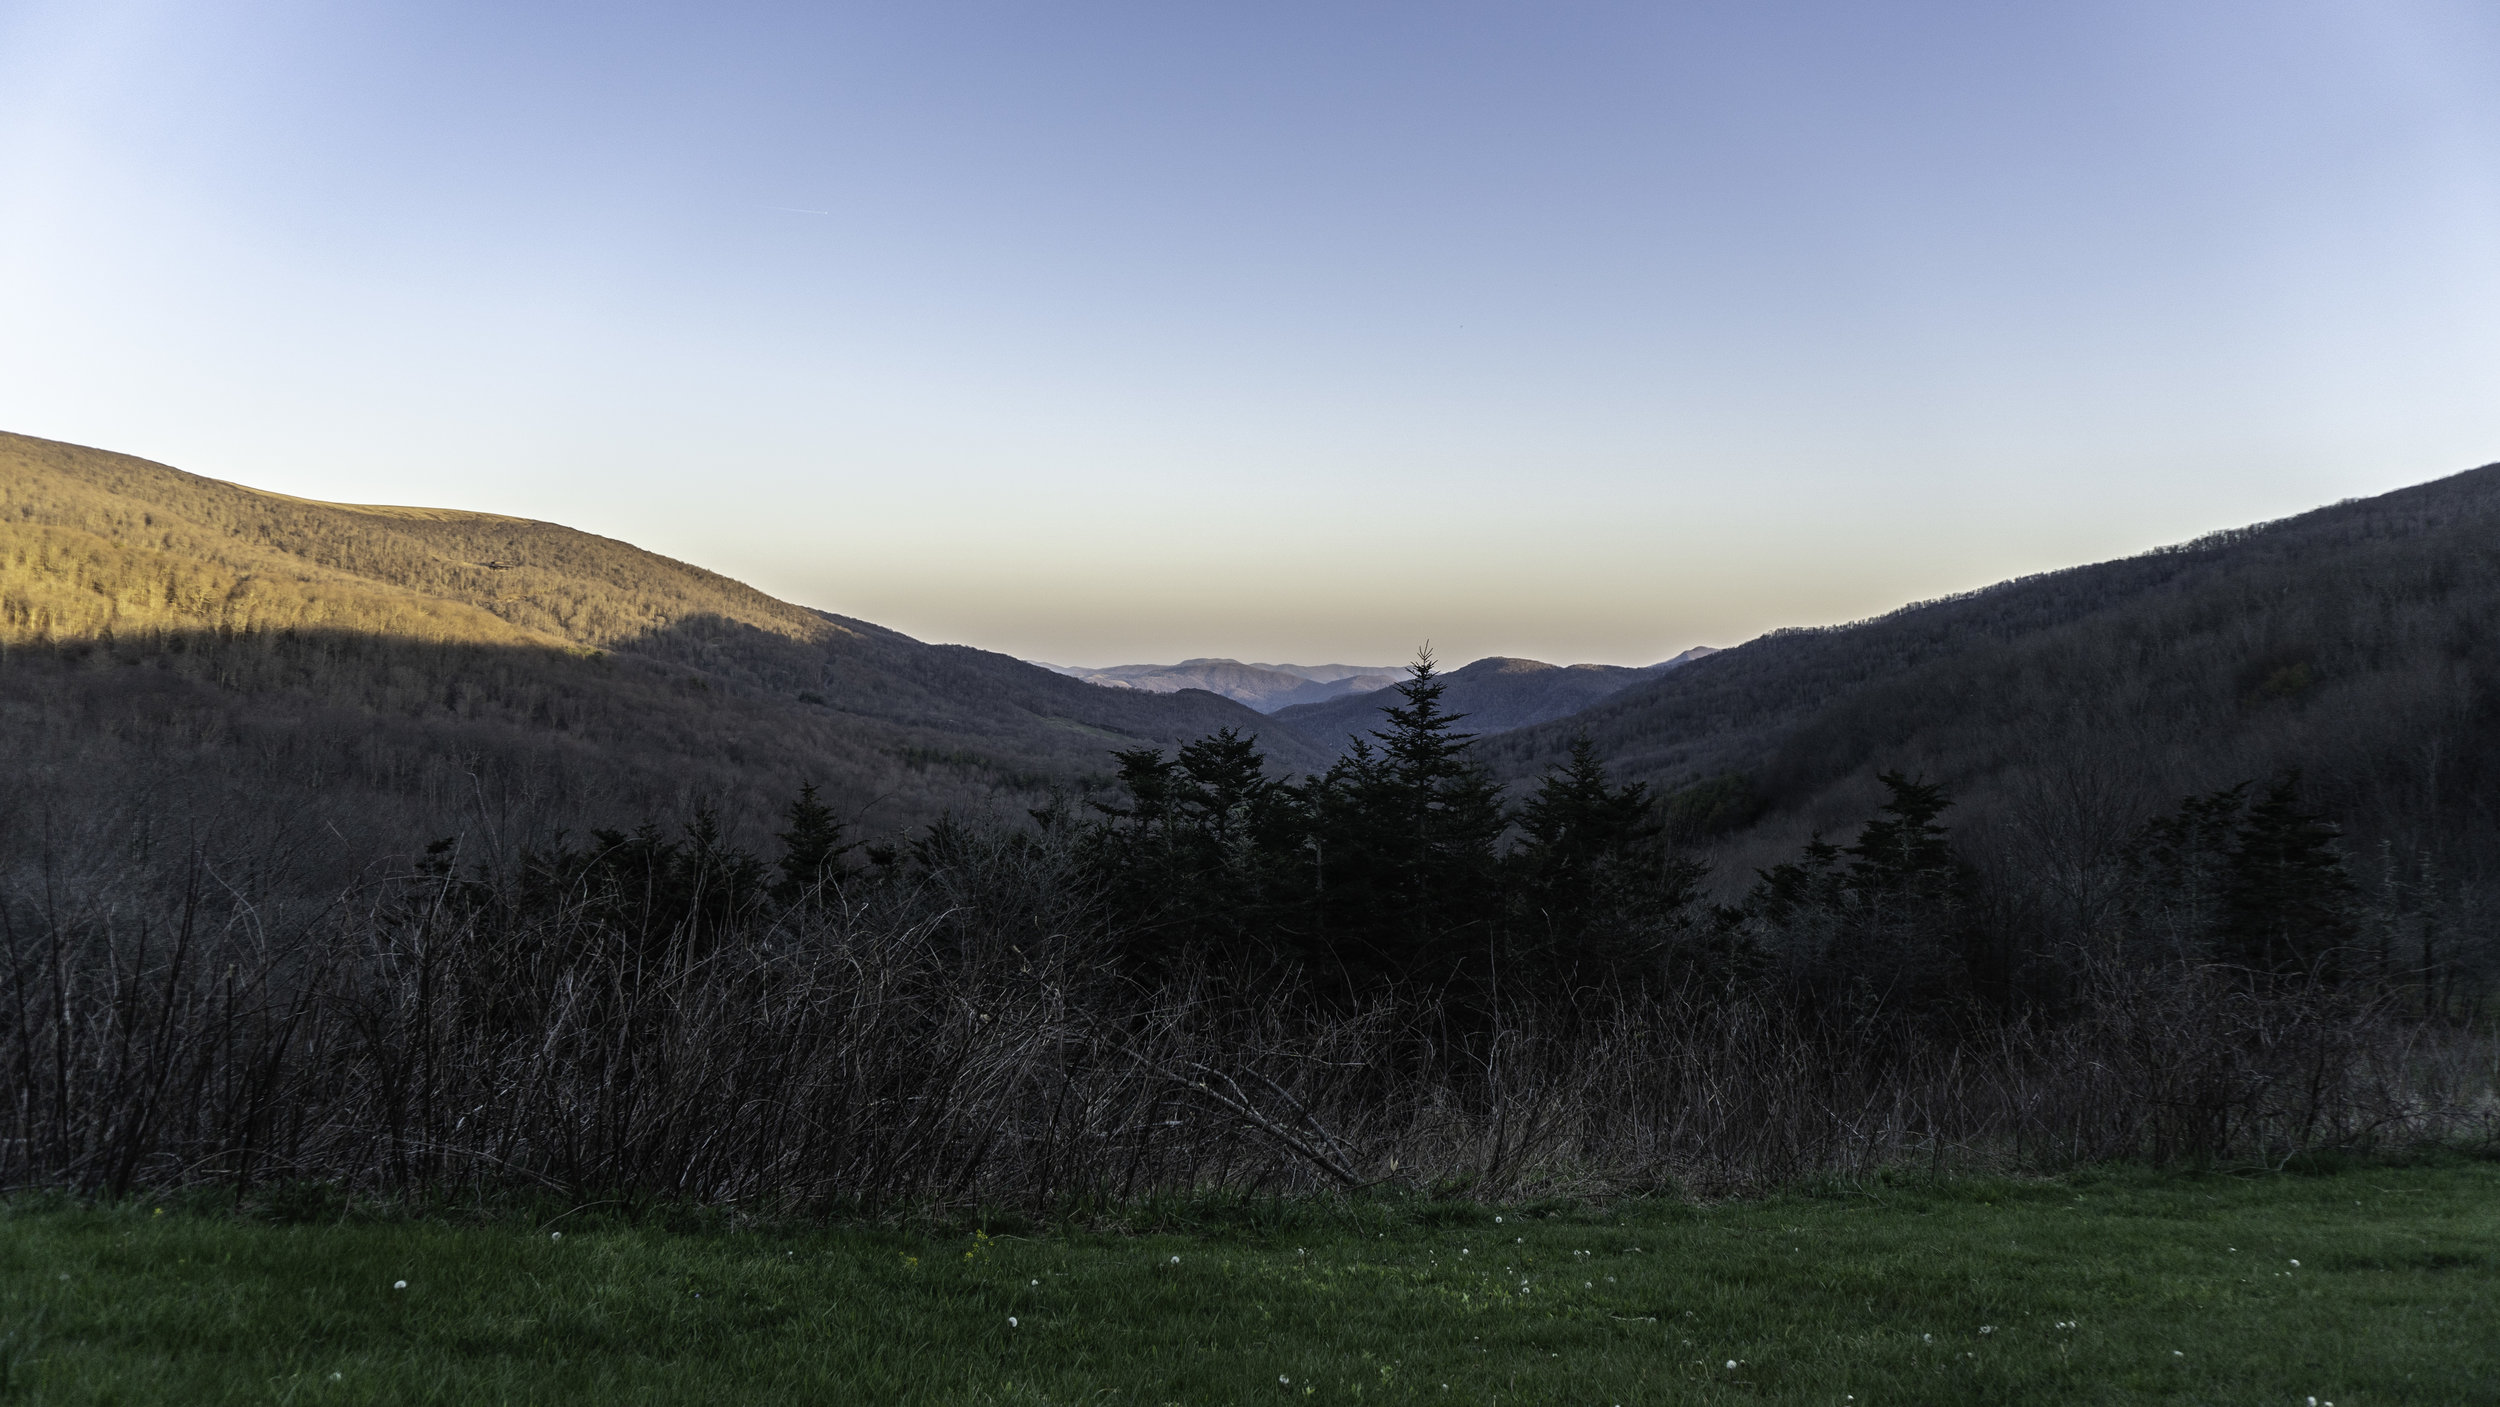  Evening view from “The Barn” - Overmountain Shelter 